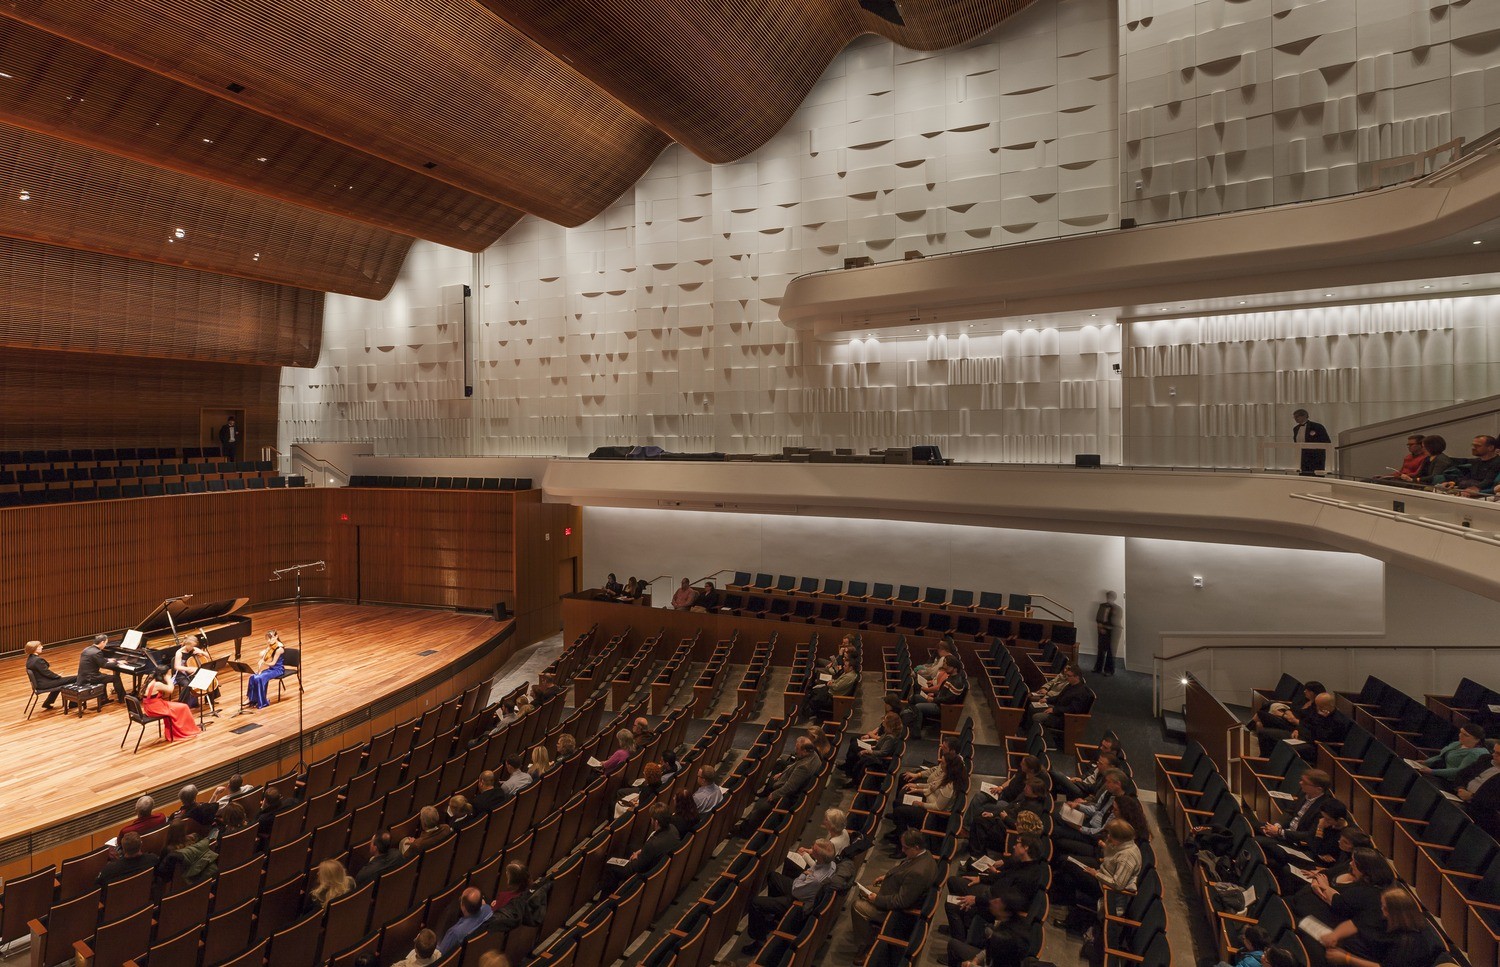 Ordway concert hall